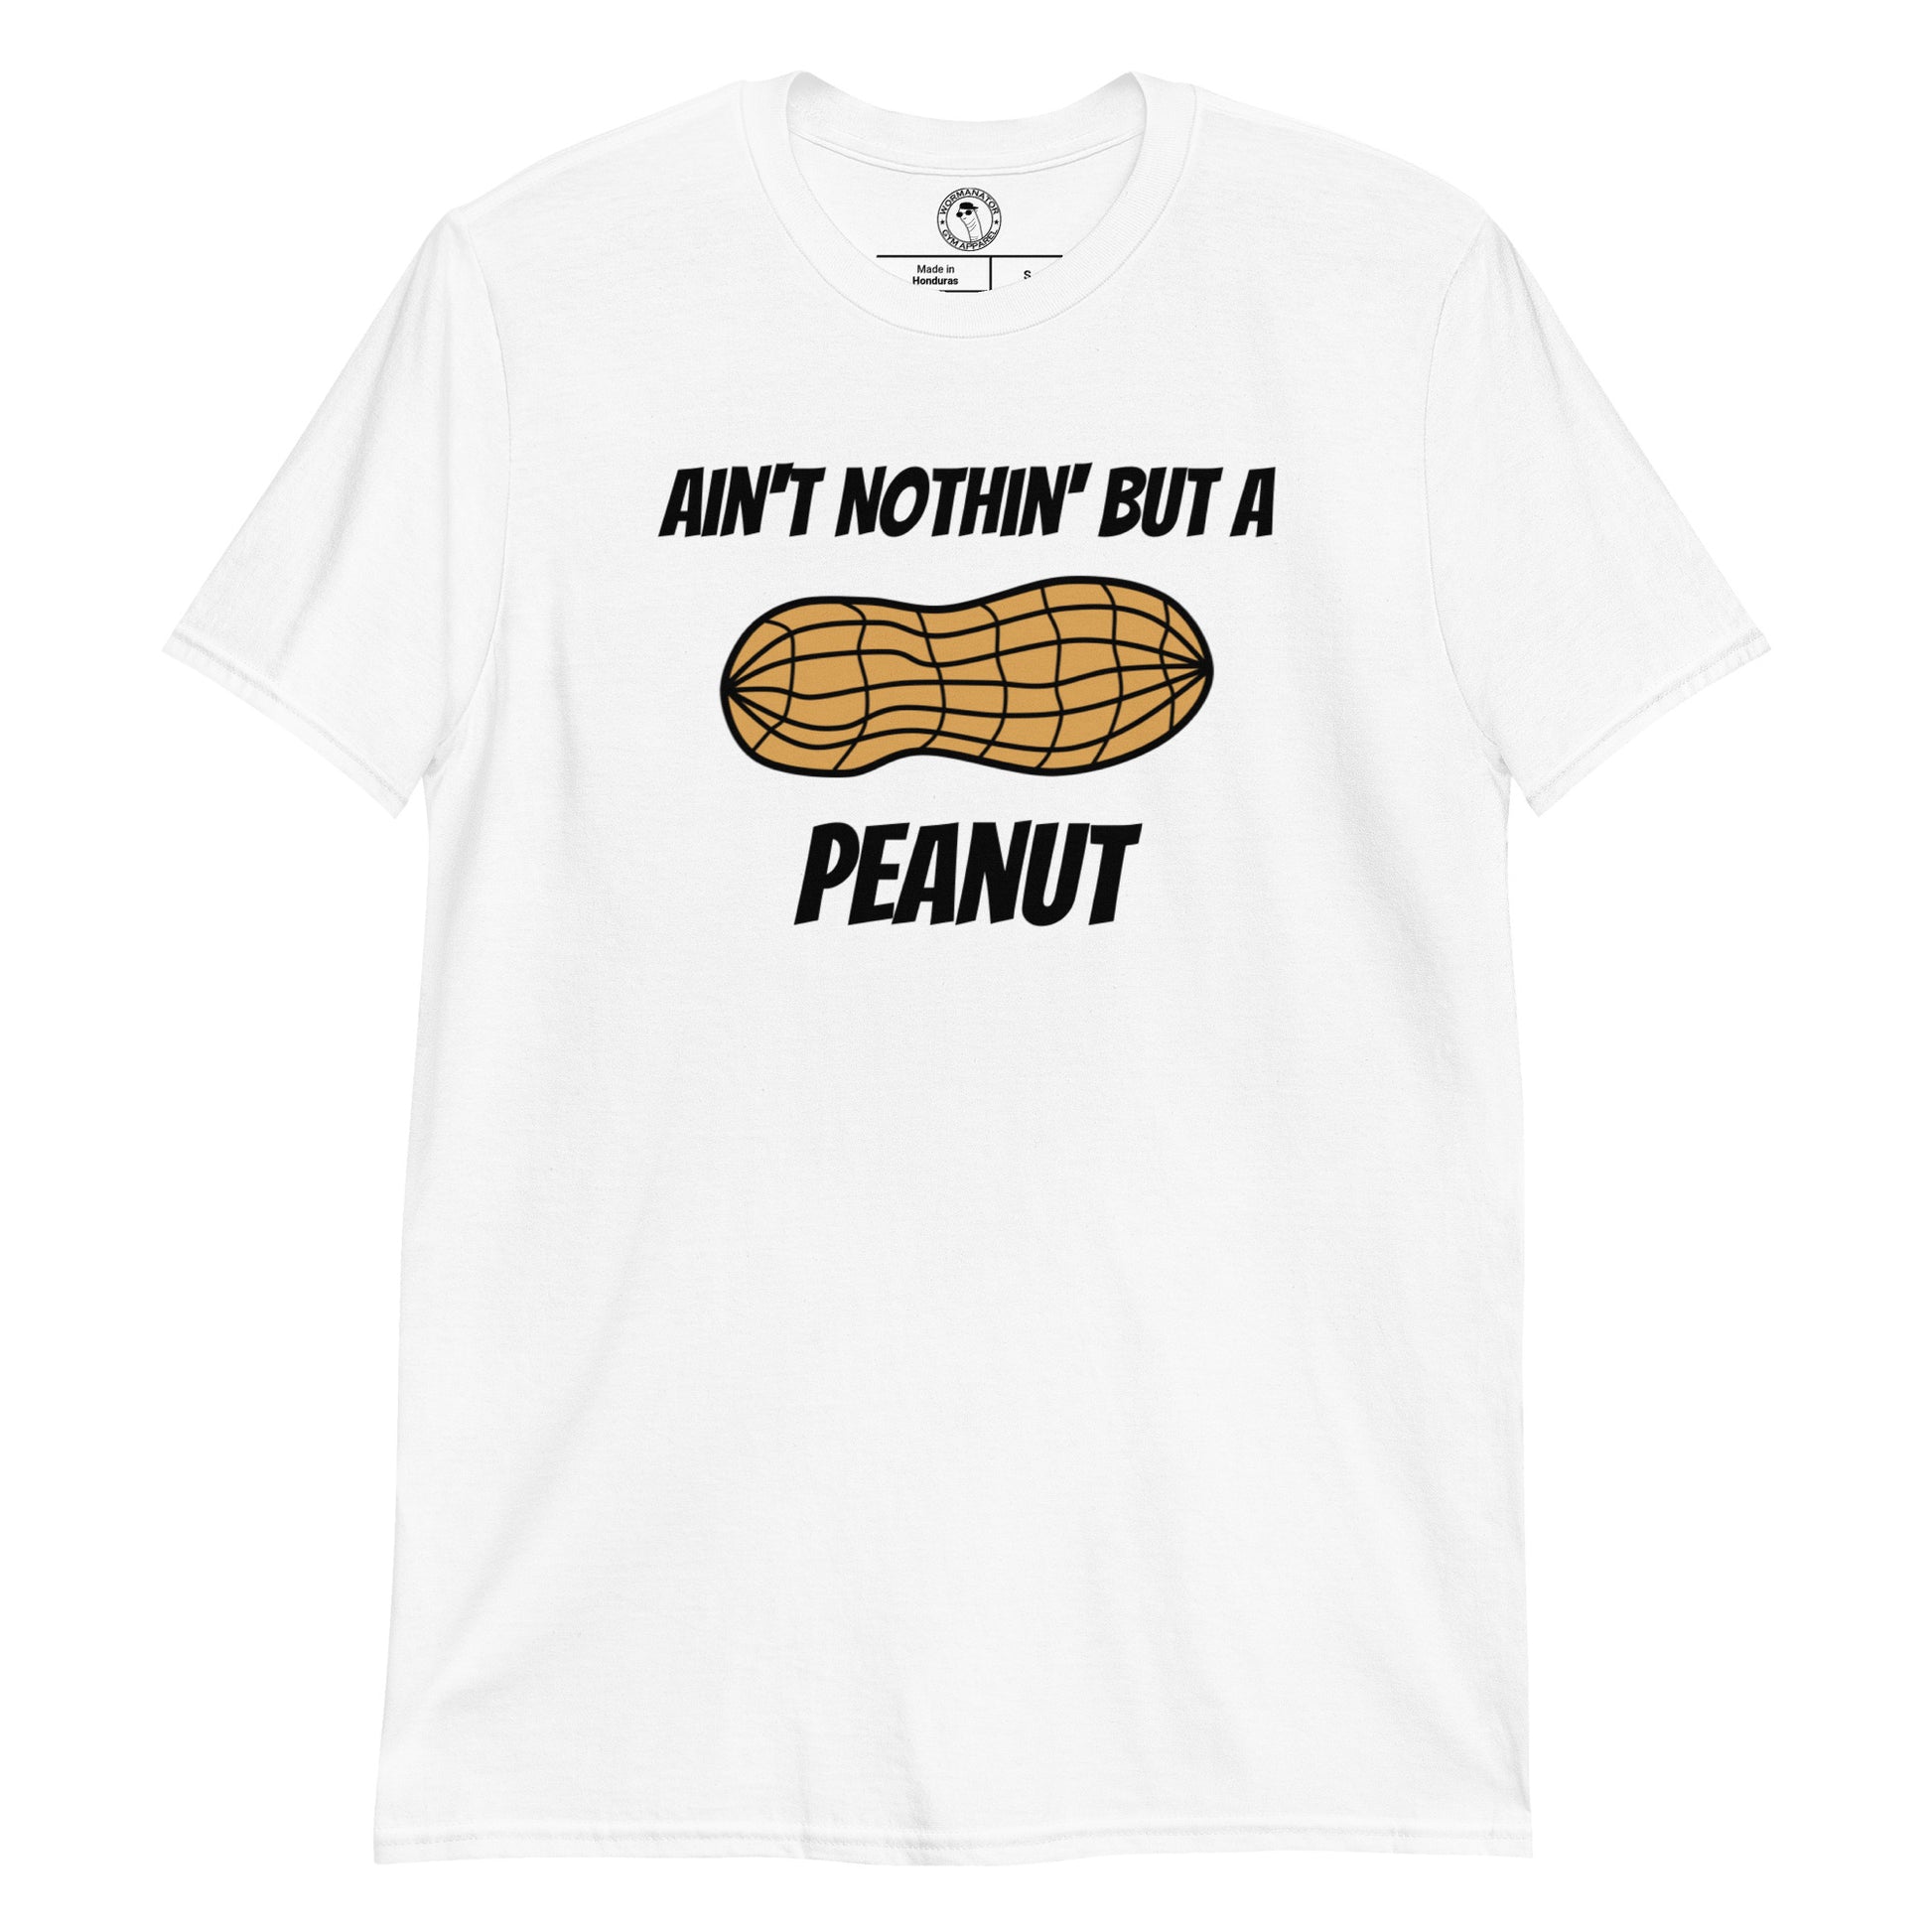 Ain't Nothin' but a Peanut Shirt in White